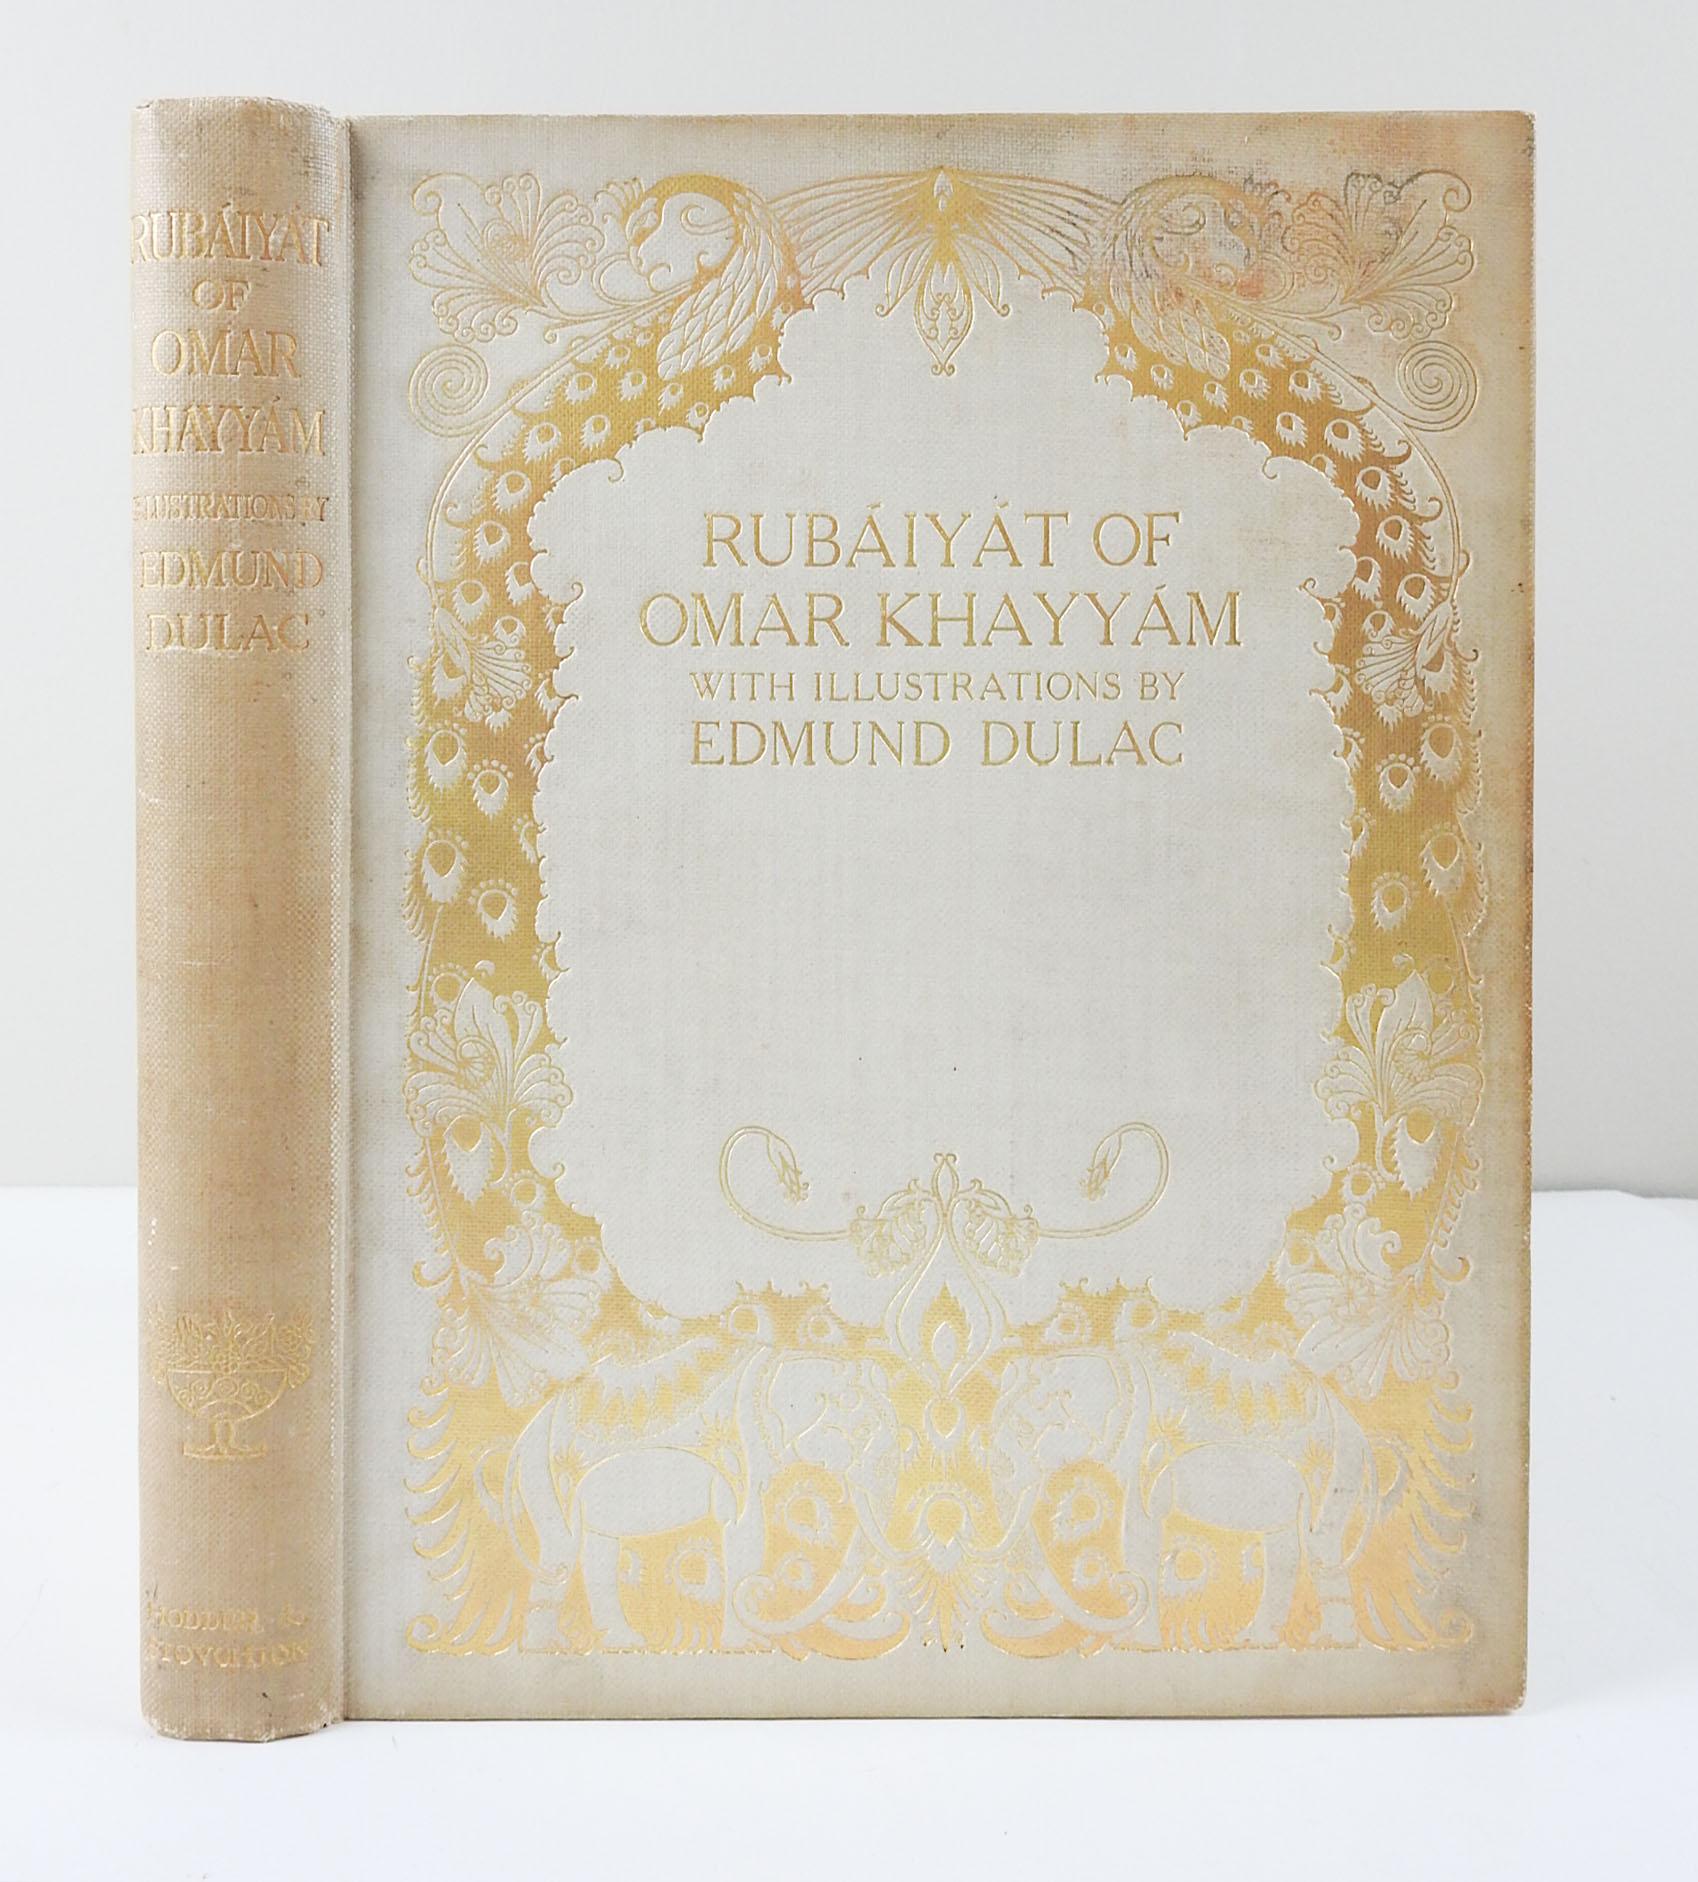 Rubaiyat of Omar Khayyam: rendered into English verse by Edward Fitzgerald, illustrated by Edmund Dulac.  Published by Hodder and Stoughton, New York London.  Printed from the second edition, Not dated, circa 1909. Cream cloth binding with gilt